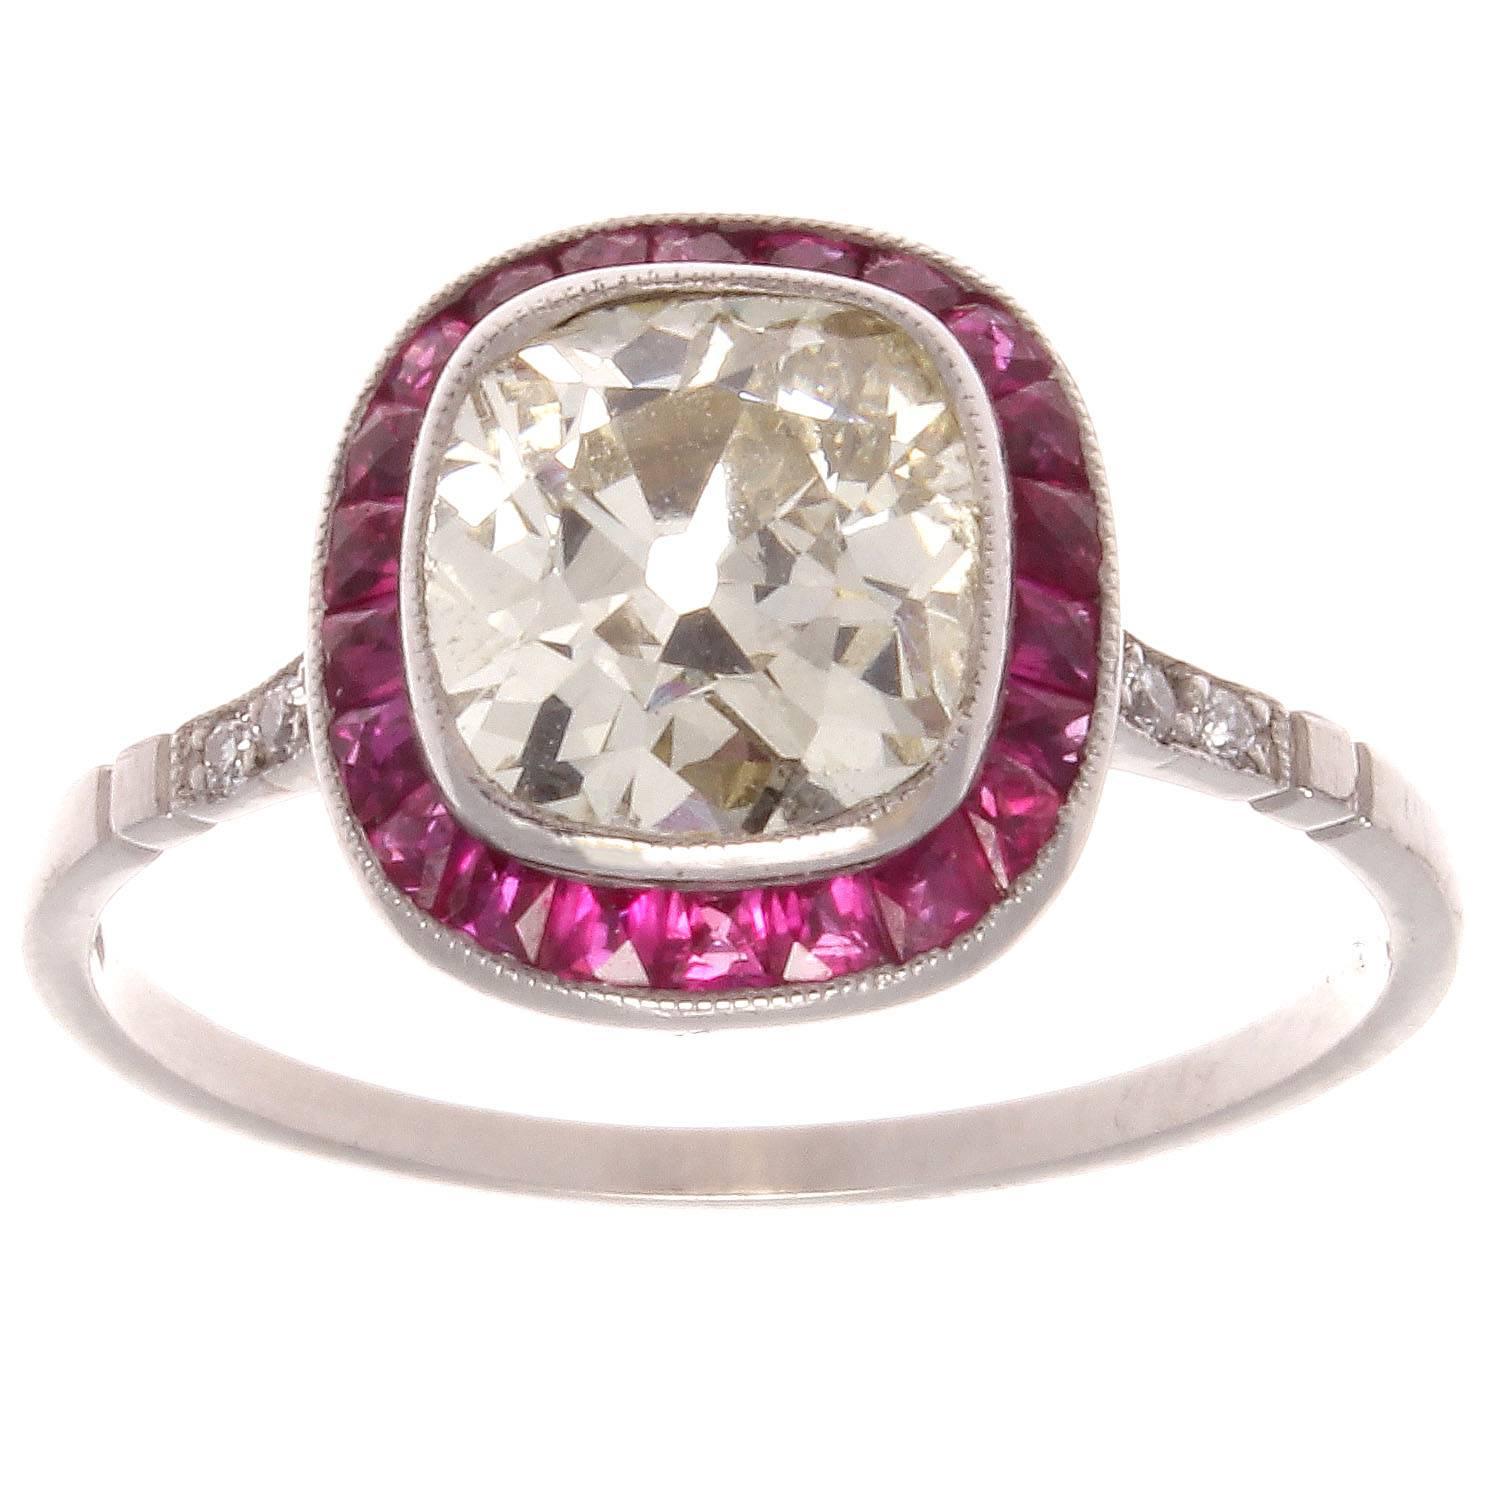 The halo setting is currently the most popular designed engagement ring. The creative use of rubies instead of diamonds gives the ring an added attractive dimension. Featuring an expertly cut 1.64 carat old cushion diamond that is L, M color and VS1